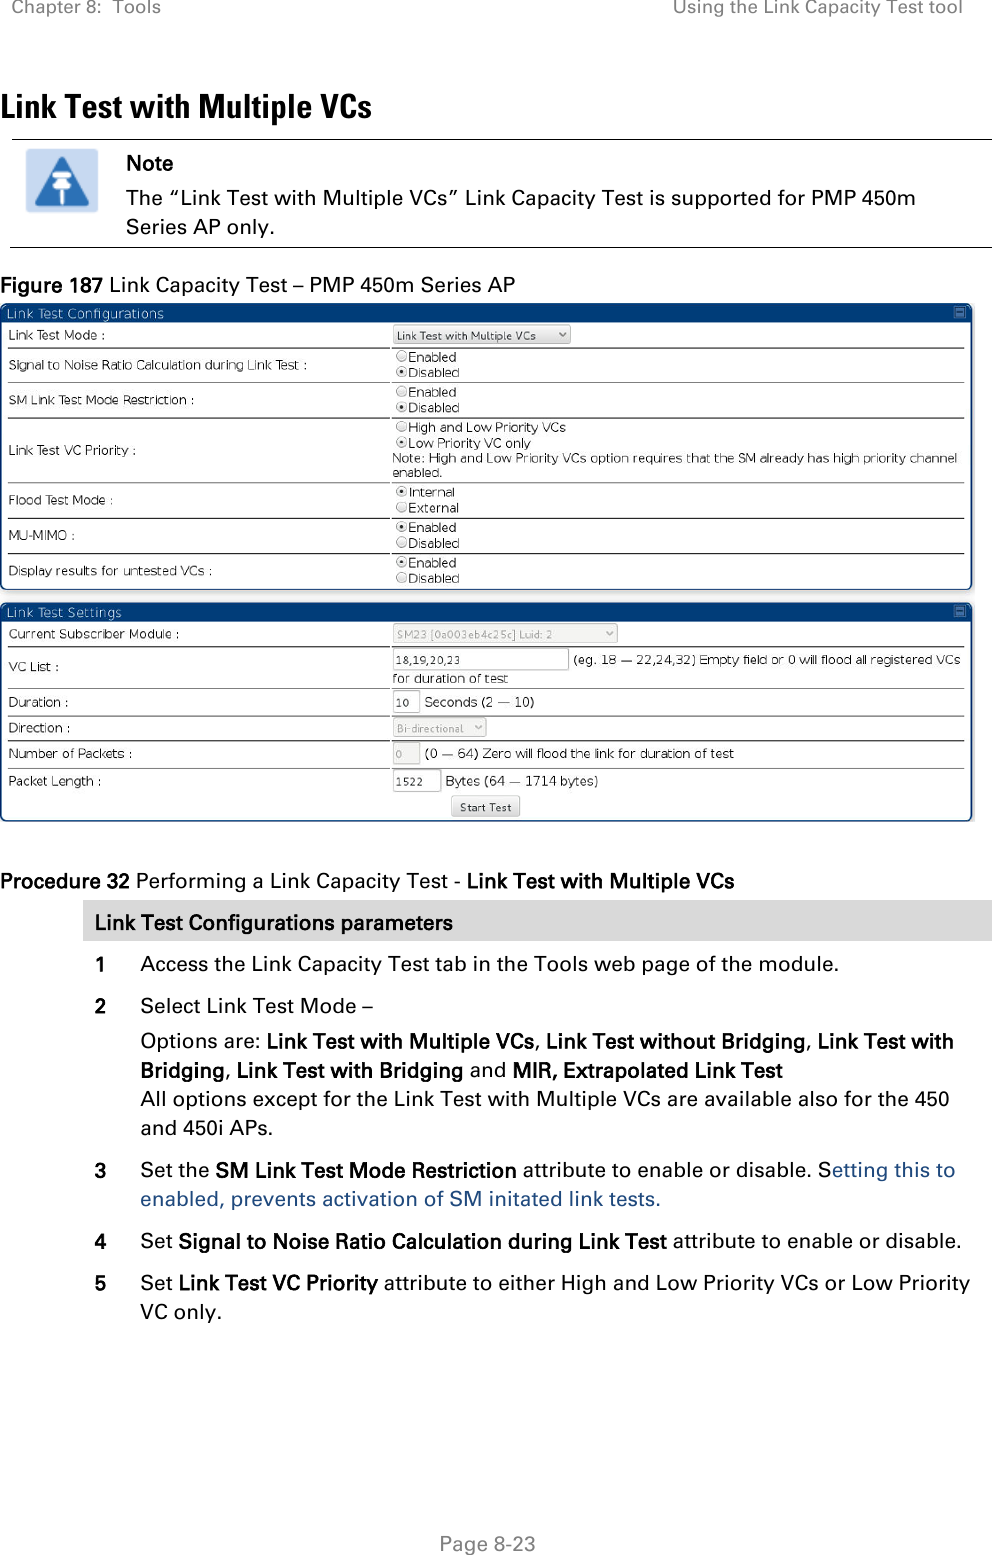 Chapter 8:  Tools Using the Link Capacity Test tool   Page 8-23 Link Test with Multiple VCs  Note The “Link Test with Multiple VCs” Link Capacity Test is supported for PMP 450m Series AP only. Figure 187 Link Capacity Test – PMP 450m Series AP   Procedure 32 Performing a Link Capacity Test - Link Test with Multiple VCs Link Test Configurations parameters 1 Access the Link Capacity Test tab in the Tools web page of the module. 2 Select Link Test Mode – Options are: Link Test with Multiple VCs, Link Test without Bridging, Link Test with Bridging, Link Test with Bridging and MIR, Extrapolated Link Test All options except for the Link Test with Multiple VCs are available also for the 450 and 450i APs. 3 Set the SM Link Test Mode Restriction attribute to enable or disable. Setting this to enabled, prevents activation of SM initated link tests. 4 Set Signal to Noise Ratio Calculation during Link Test attribute to enable or disable. 5 Set Link Test VC Priority attribute to either High and Low Priority VCs or Low Priority VC only. 